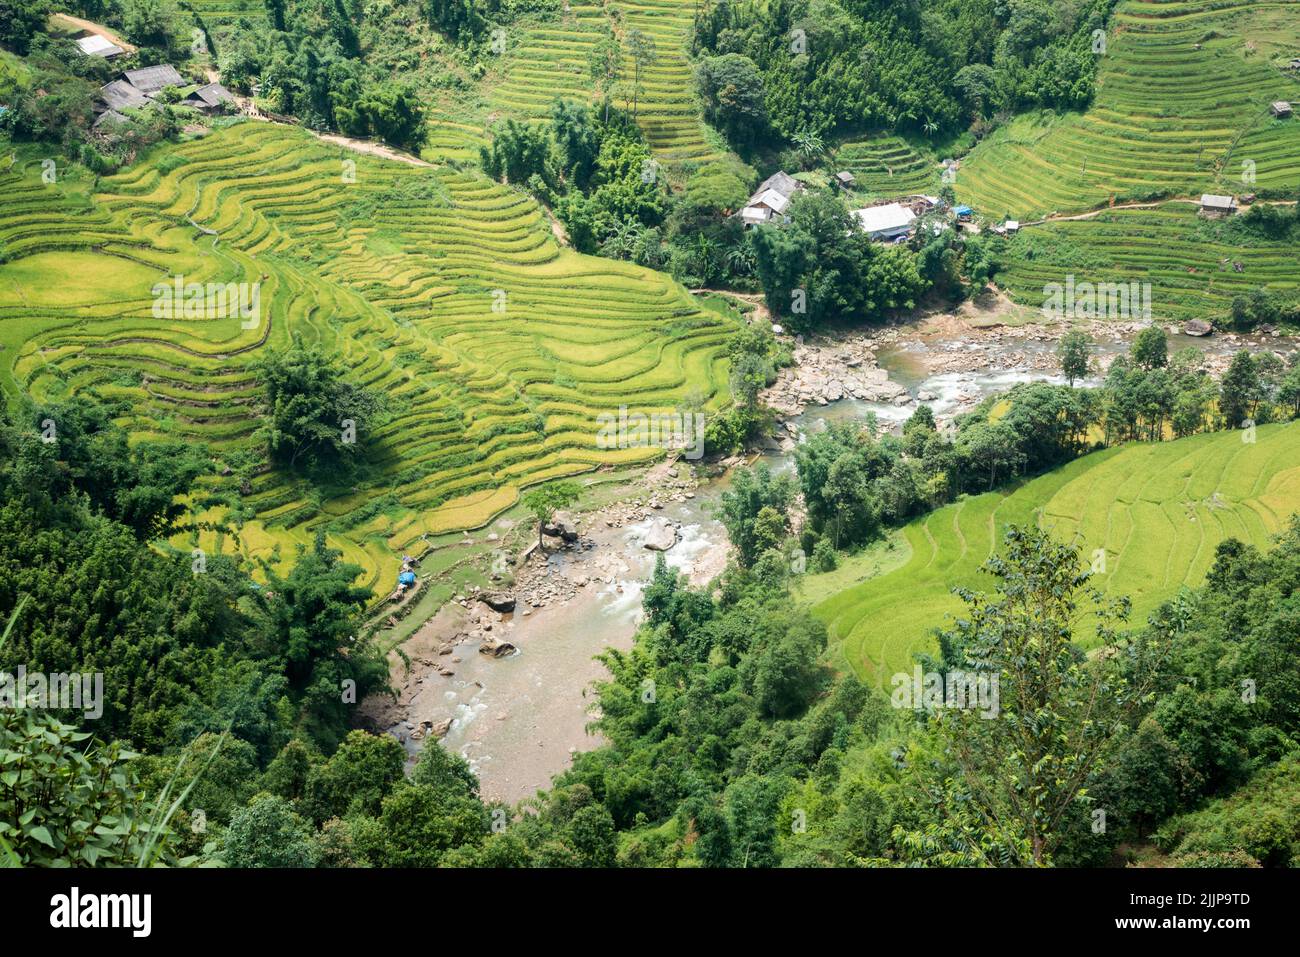 A beautiful view of rice fields in Sa pa, Vietnam Stock Photo